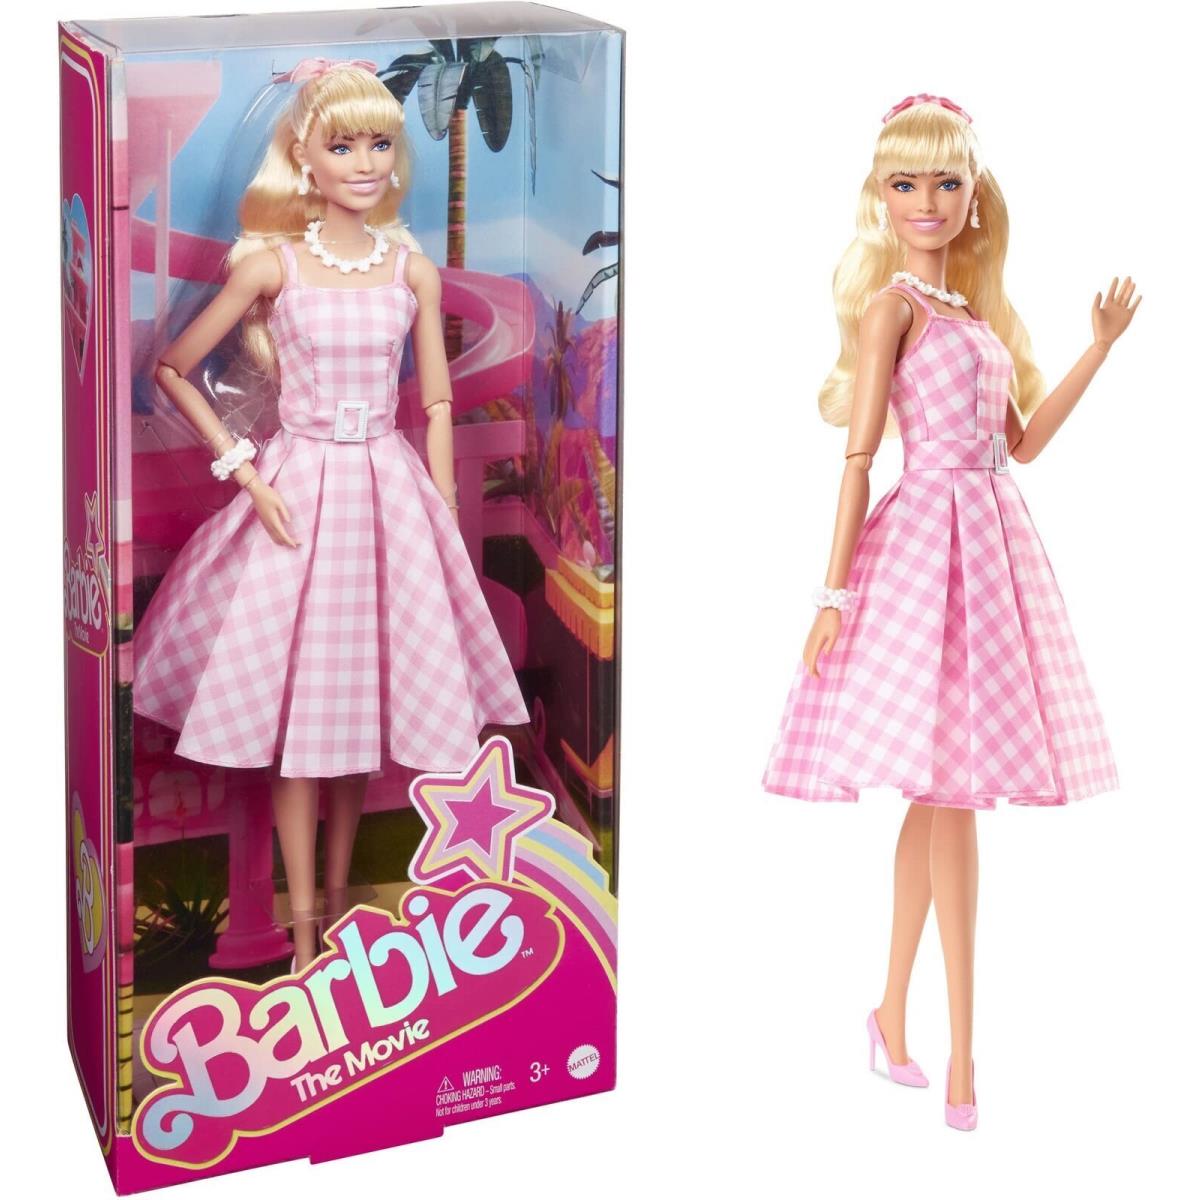 Barbie The Movie Doll Margot Robbie Collectible Wearing Pink Gingham Dress